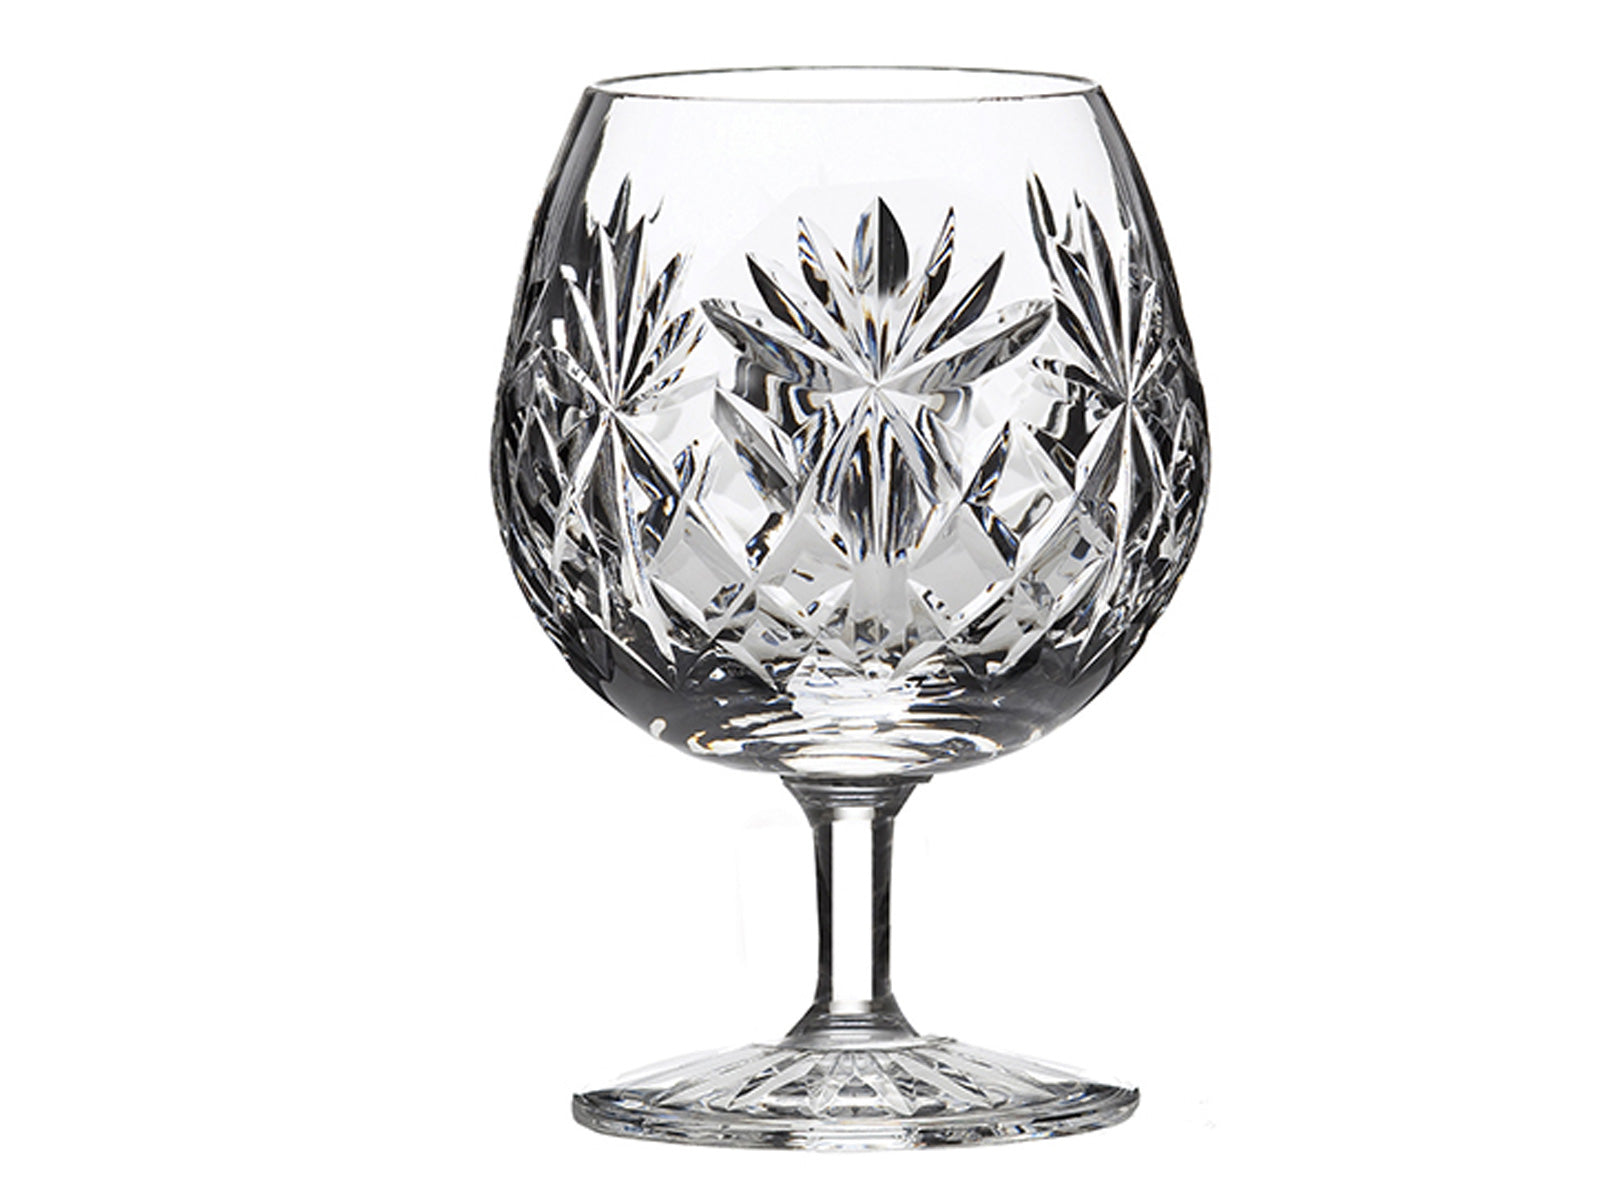 A short stemmed crystal glass with a kintyre cut around the bowl, which has a bed of diamonds at the base and a seven-pointed fan reaching towards the smooth edge.